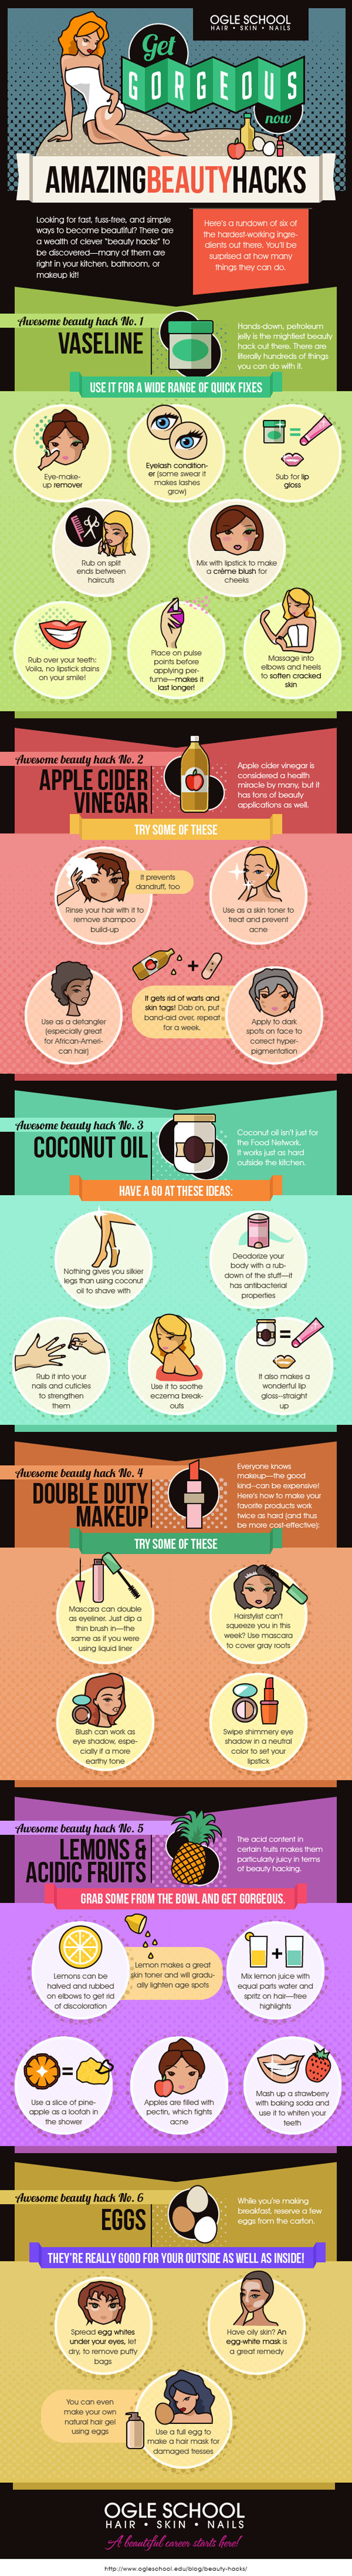 Get Gorgeous With These Six Amazing Beauty Hacks